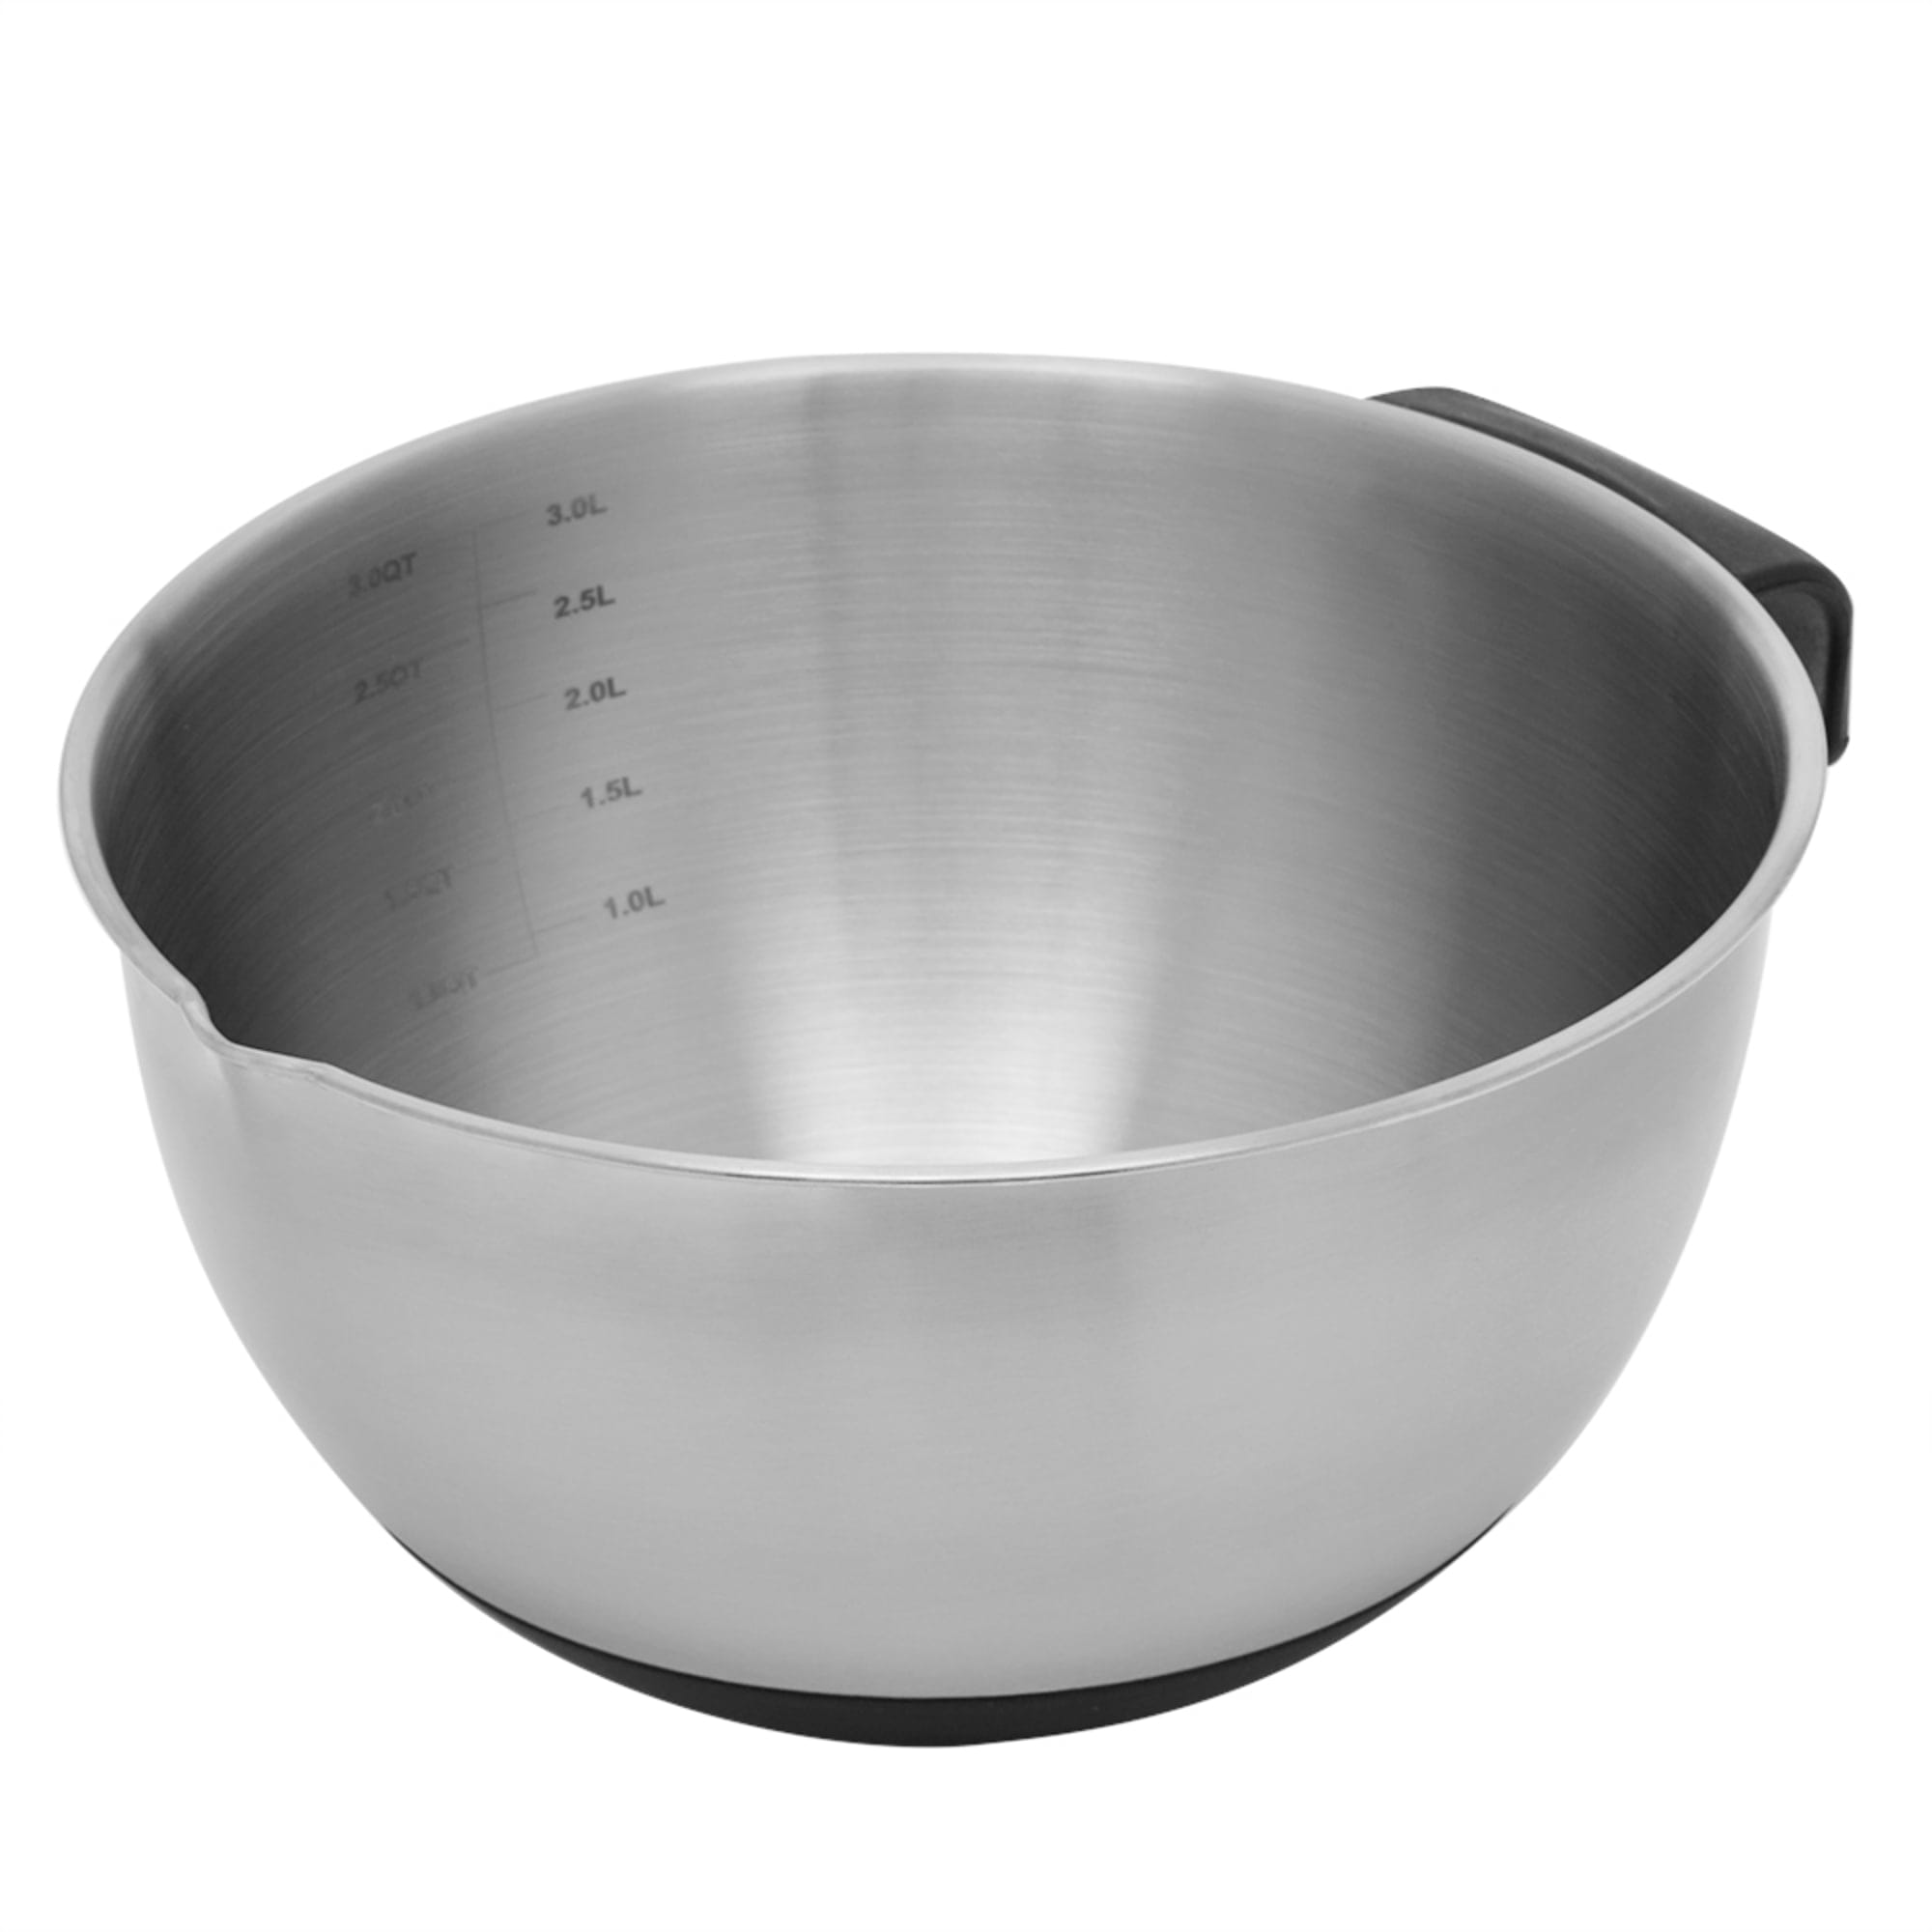 3 Qt. Stainless Steel Mixing Bowl with Measurements, Non-Skid Bottom, Handle and Pour Spout